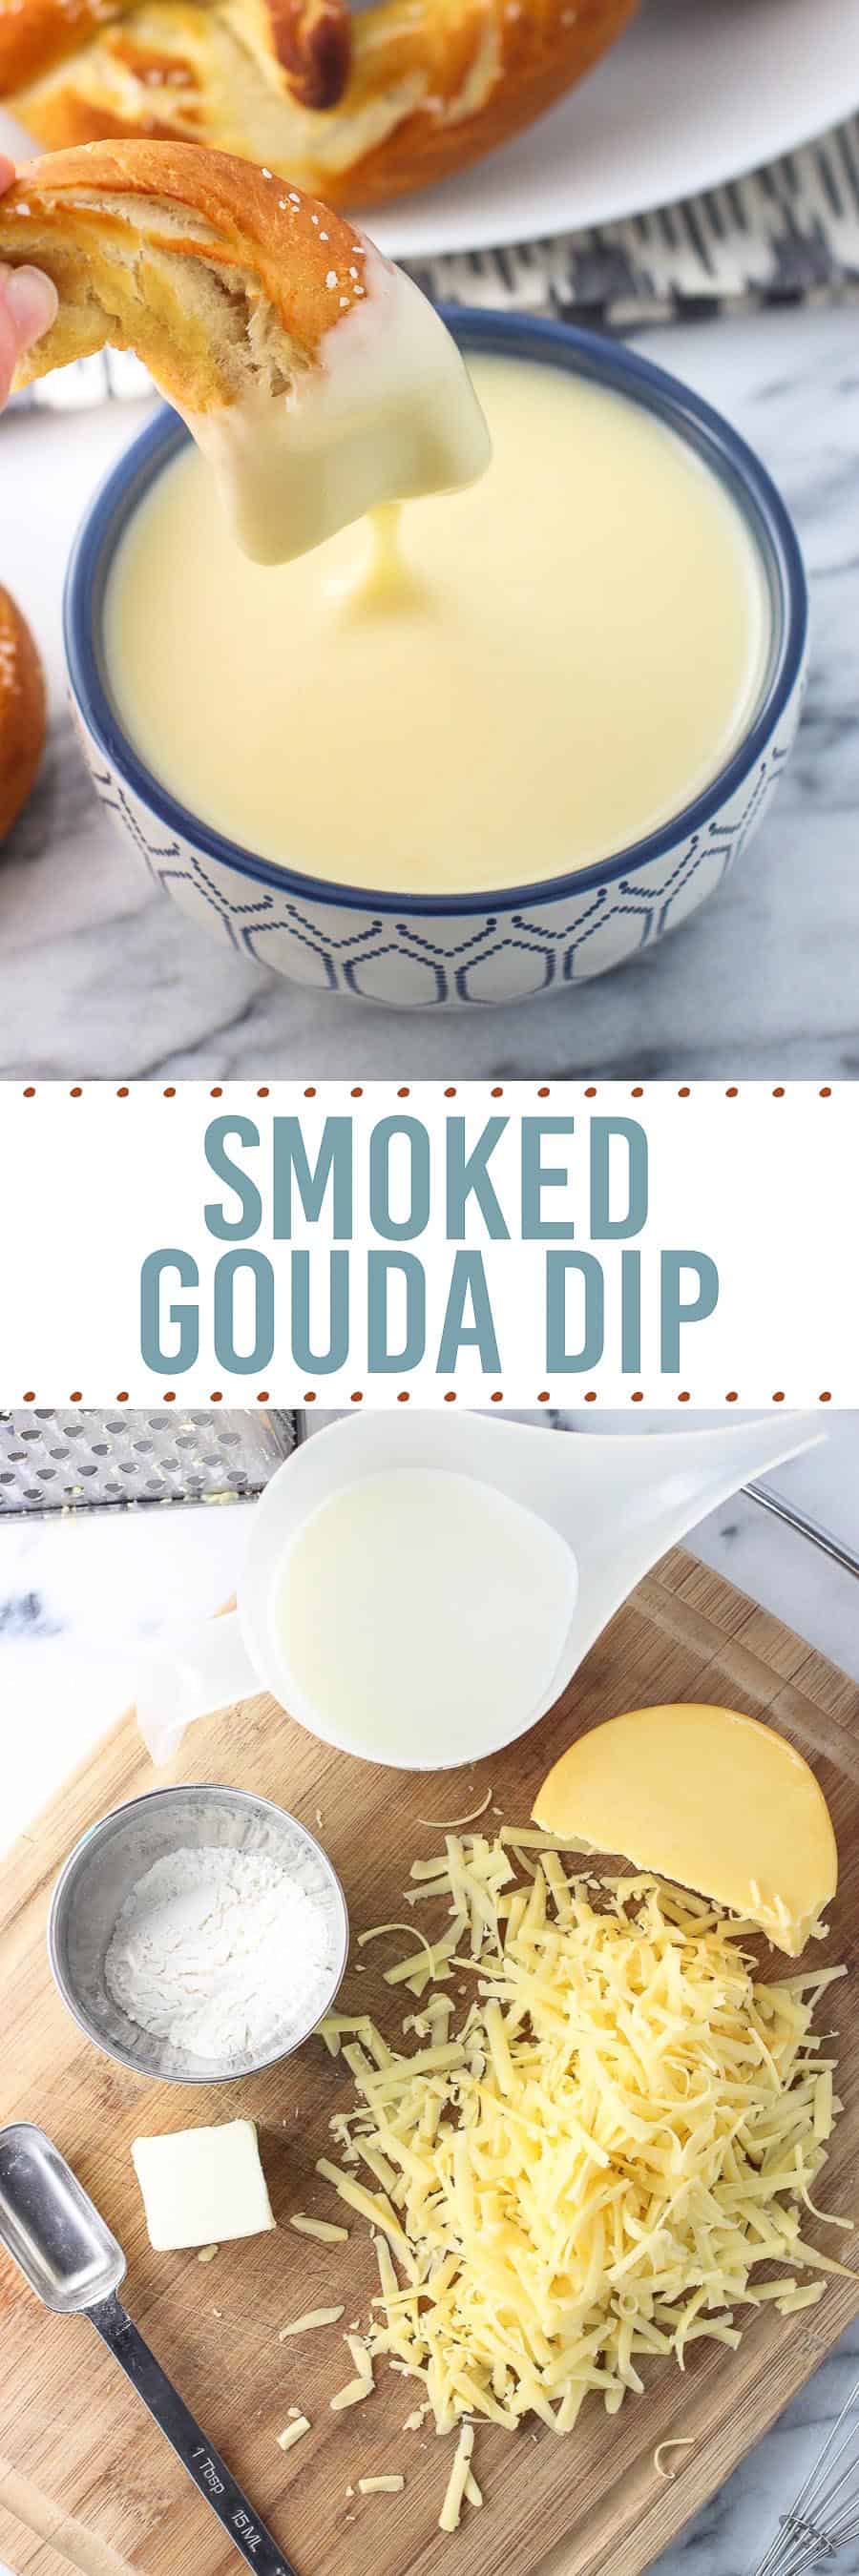 A graphic of the dip in a bowl and the recipe ingredients with the recipe title in between.